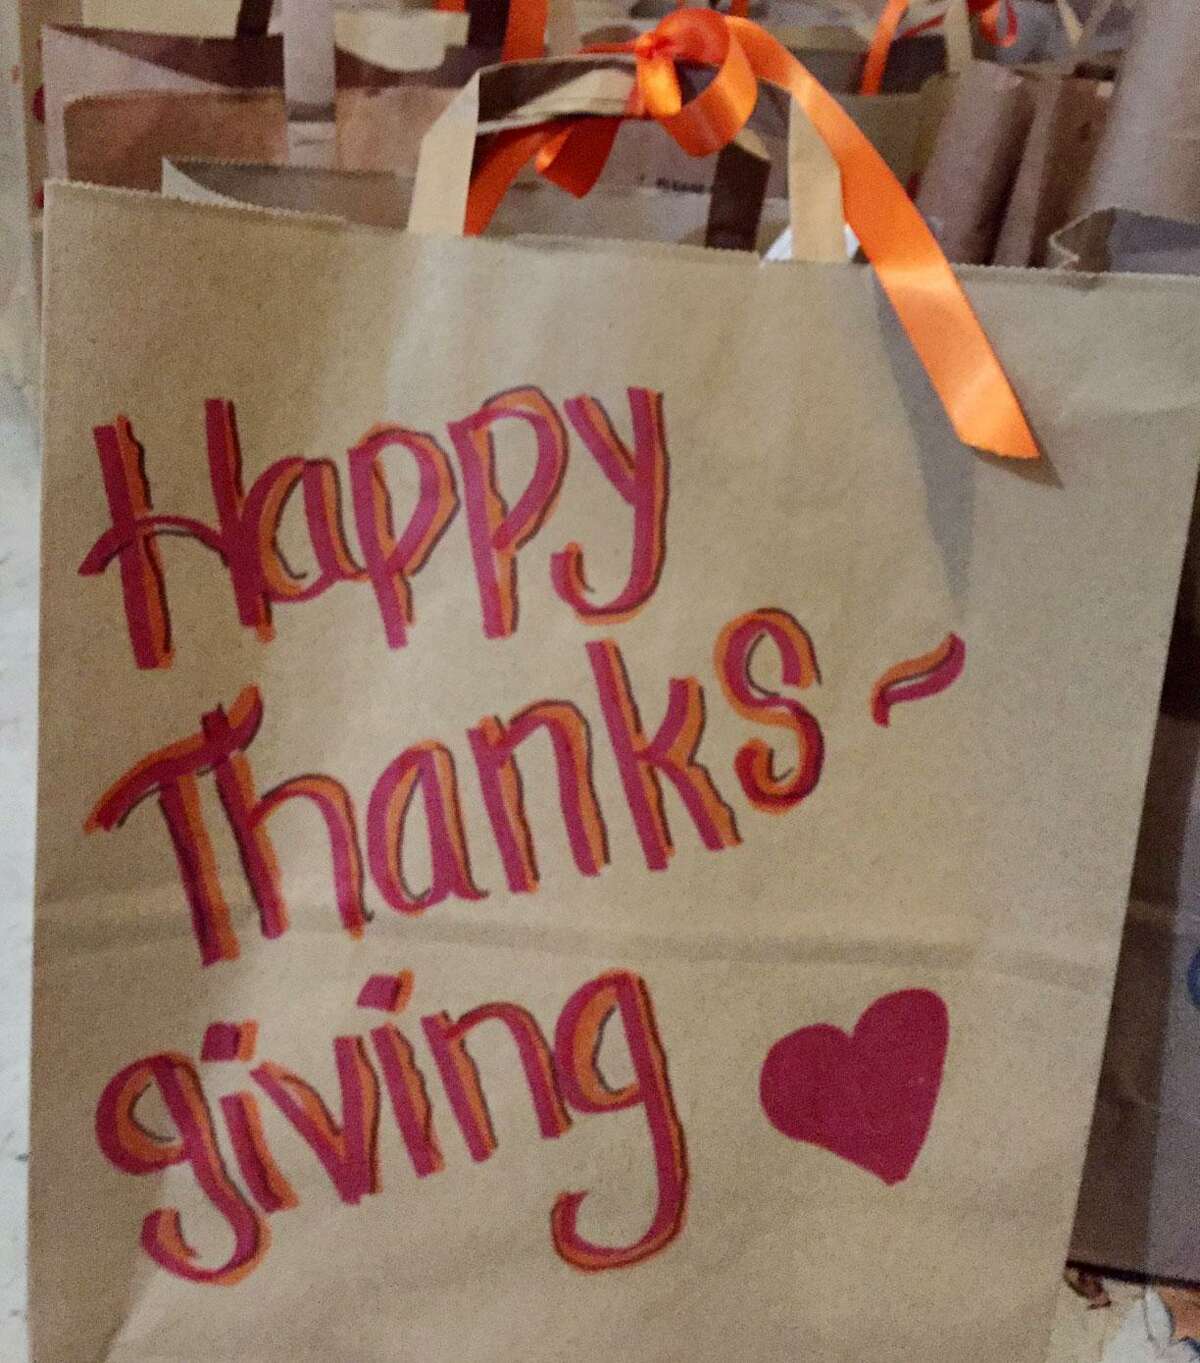 Toni Boucher of Wilton is putting out a last minute call for 100 paper bags containing five ingredients for Thanksgiving side dishes to go along with 500 turkeys being distributed to needy families.